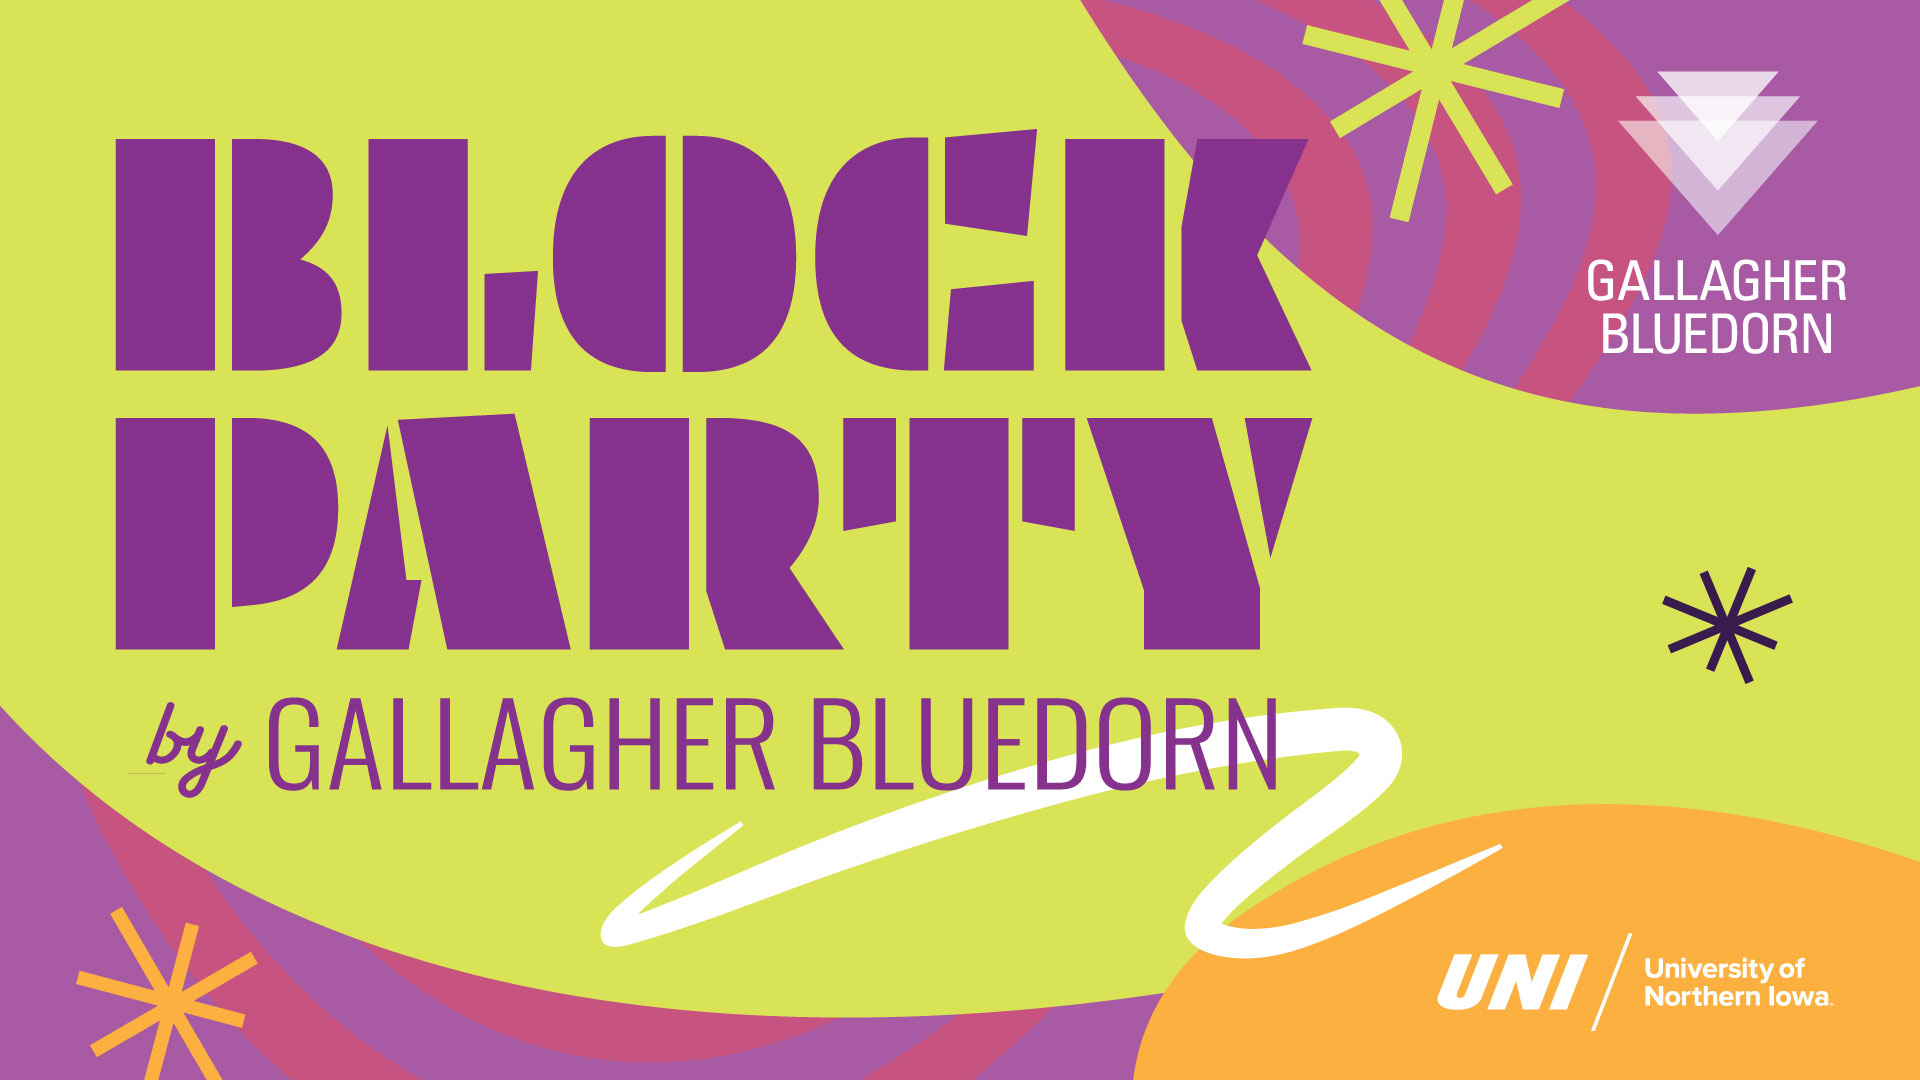 Text reads "BLOCK PARTY by Gallagher Bluedorn" on a playful background of lime green, orange, and purple with accenting starburst shapes